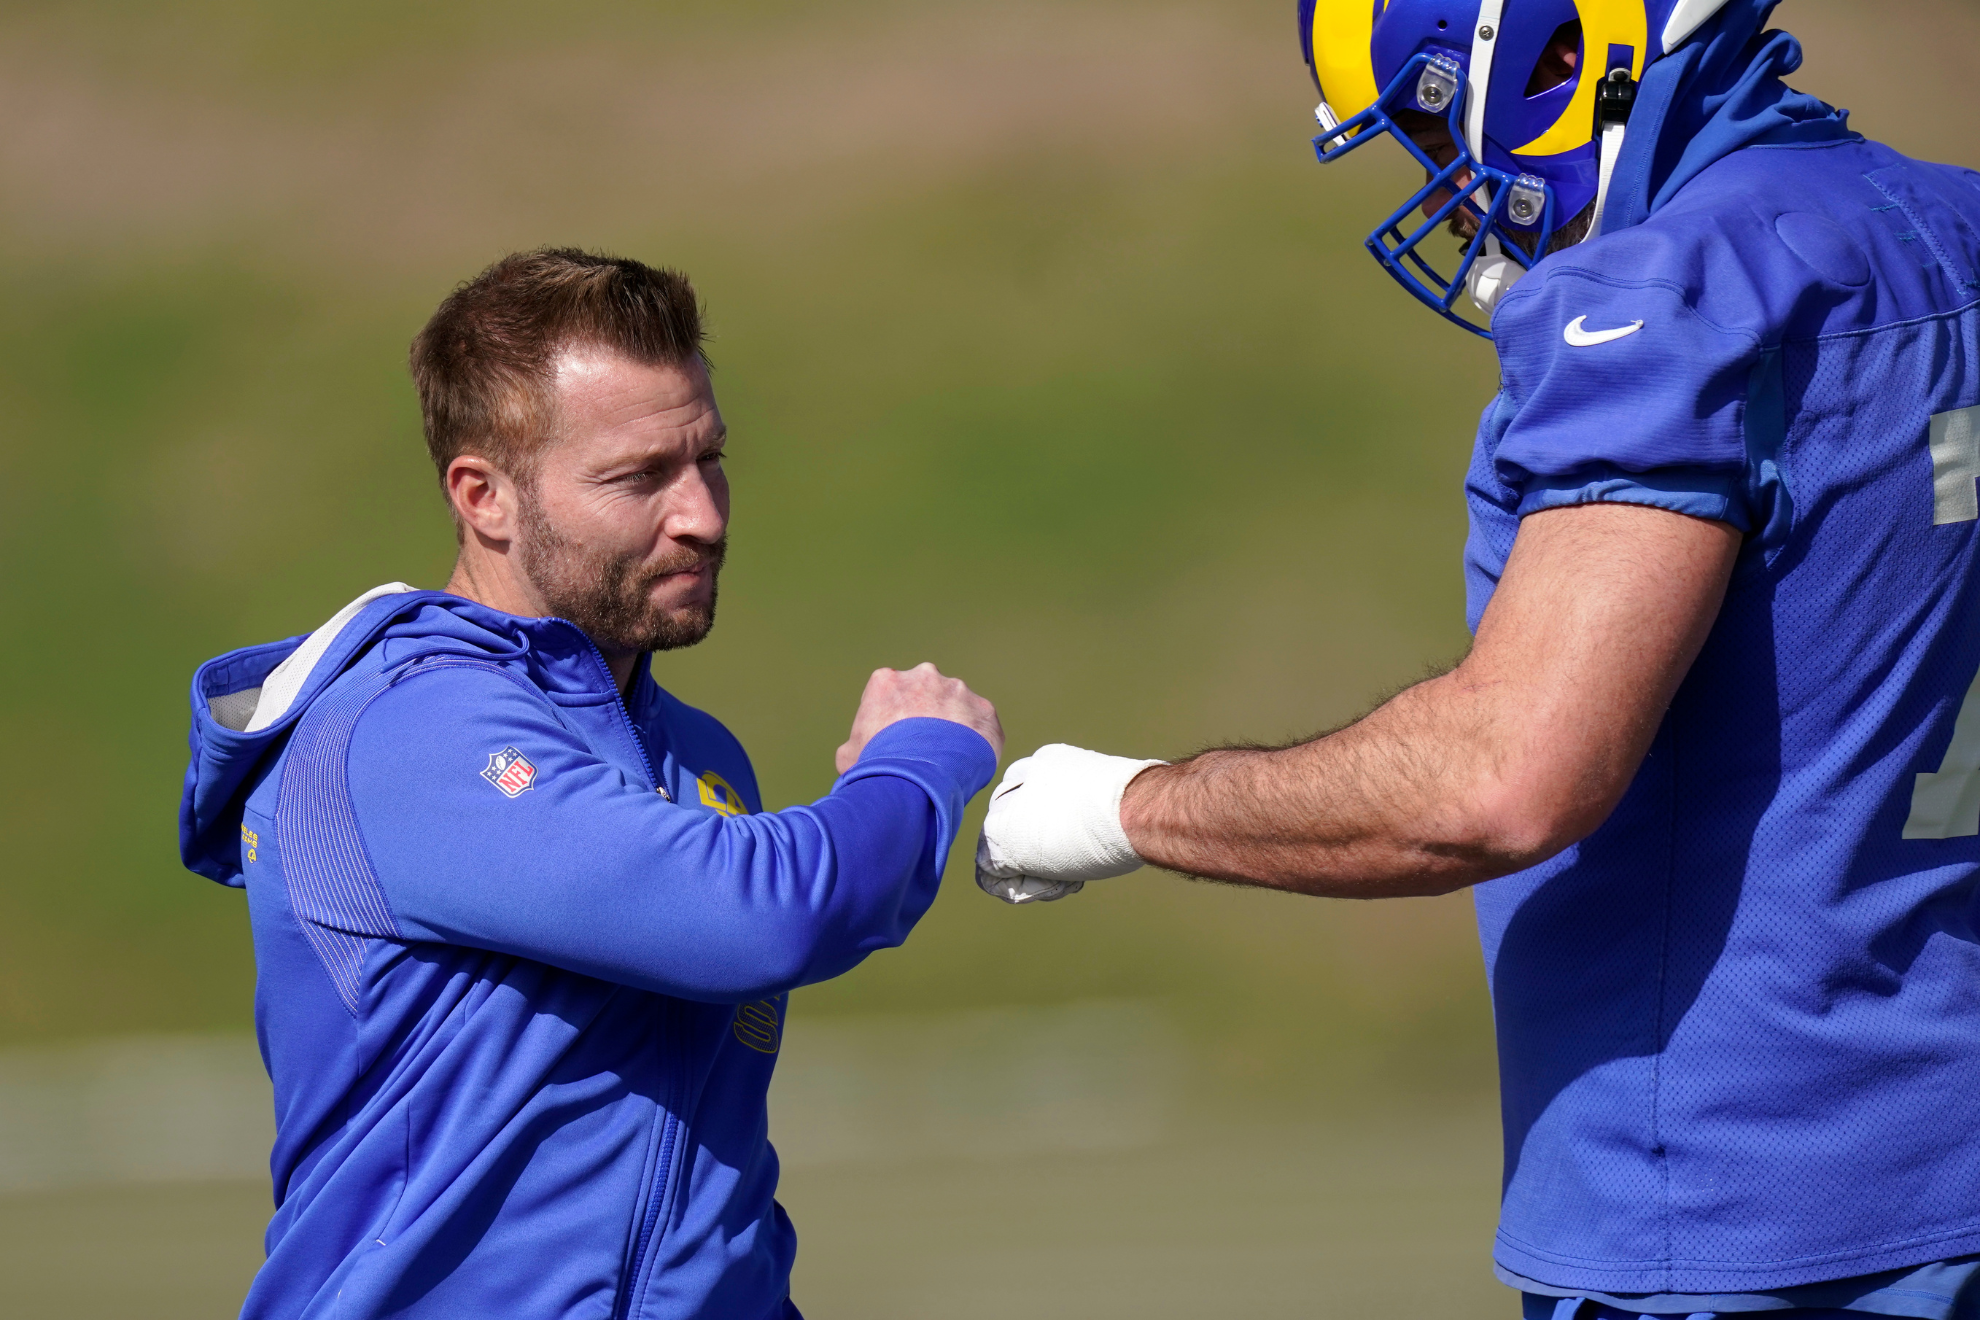 Sean McVay with Andrew Whitworth at a Los Angeles Rams practice.